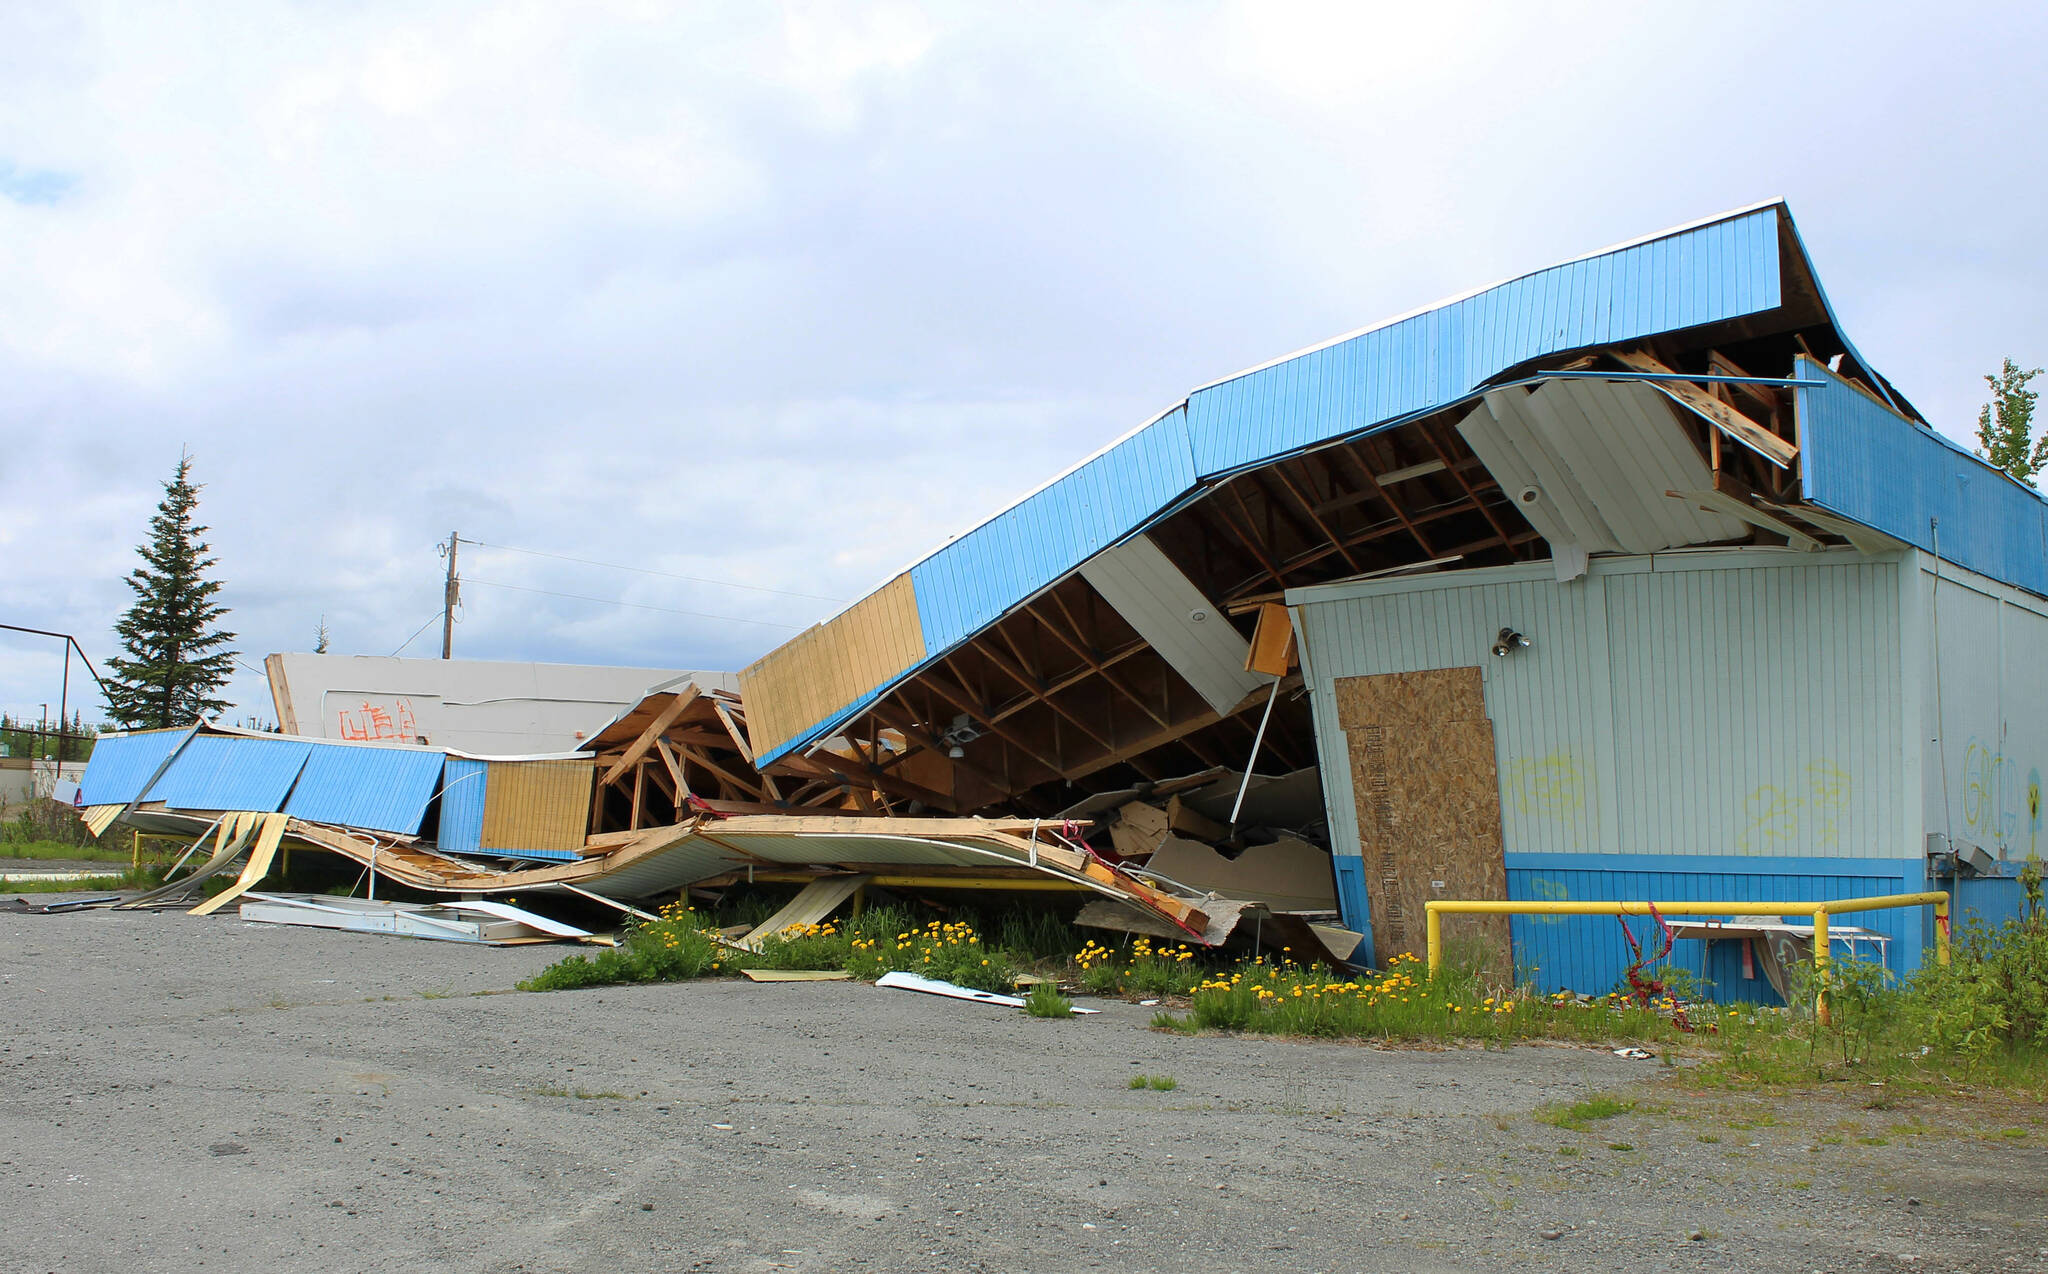 Building materials pile up at the site of the former ZipMart on Wednesday, June 14, 2023, in Sterling, Alaska. (Ashlyn O’Hara/Peninsula Clarion)